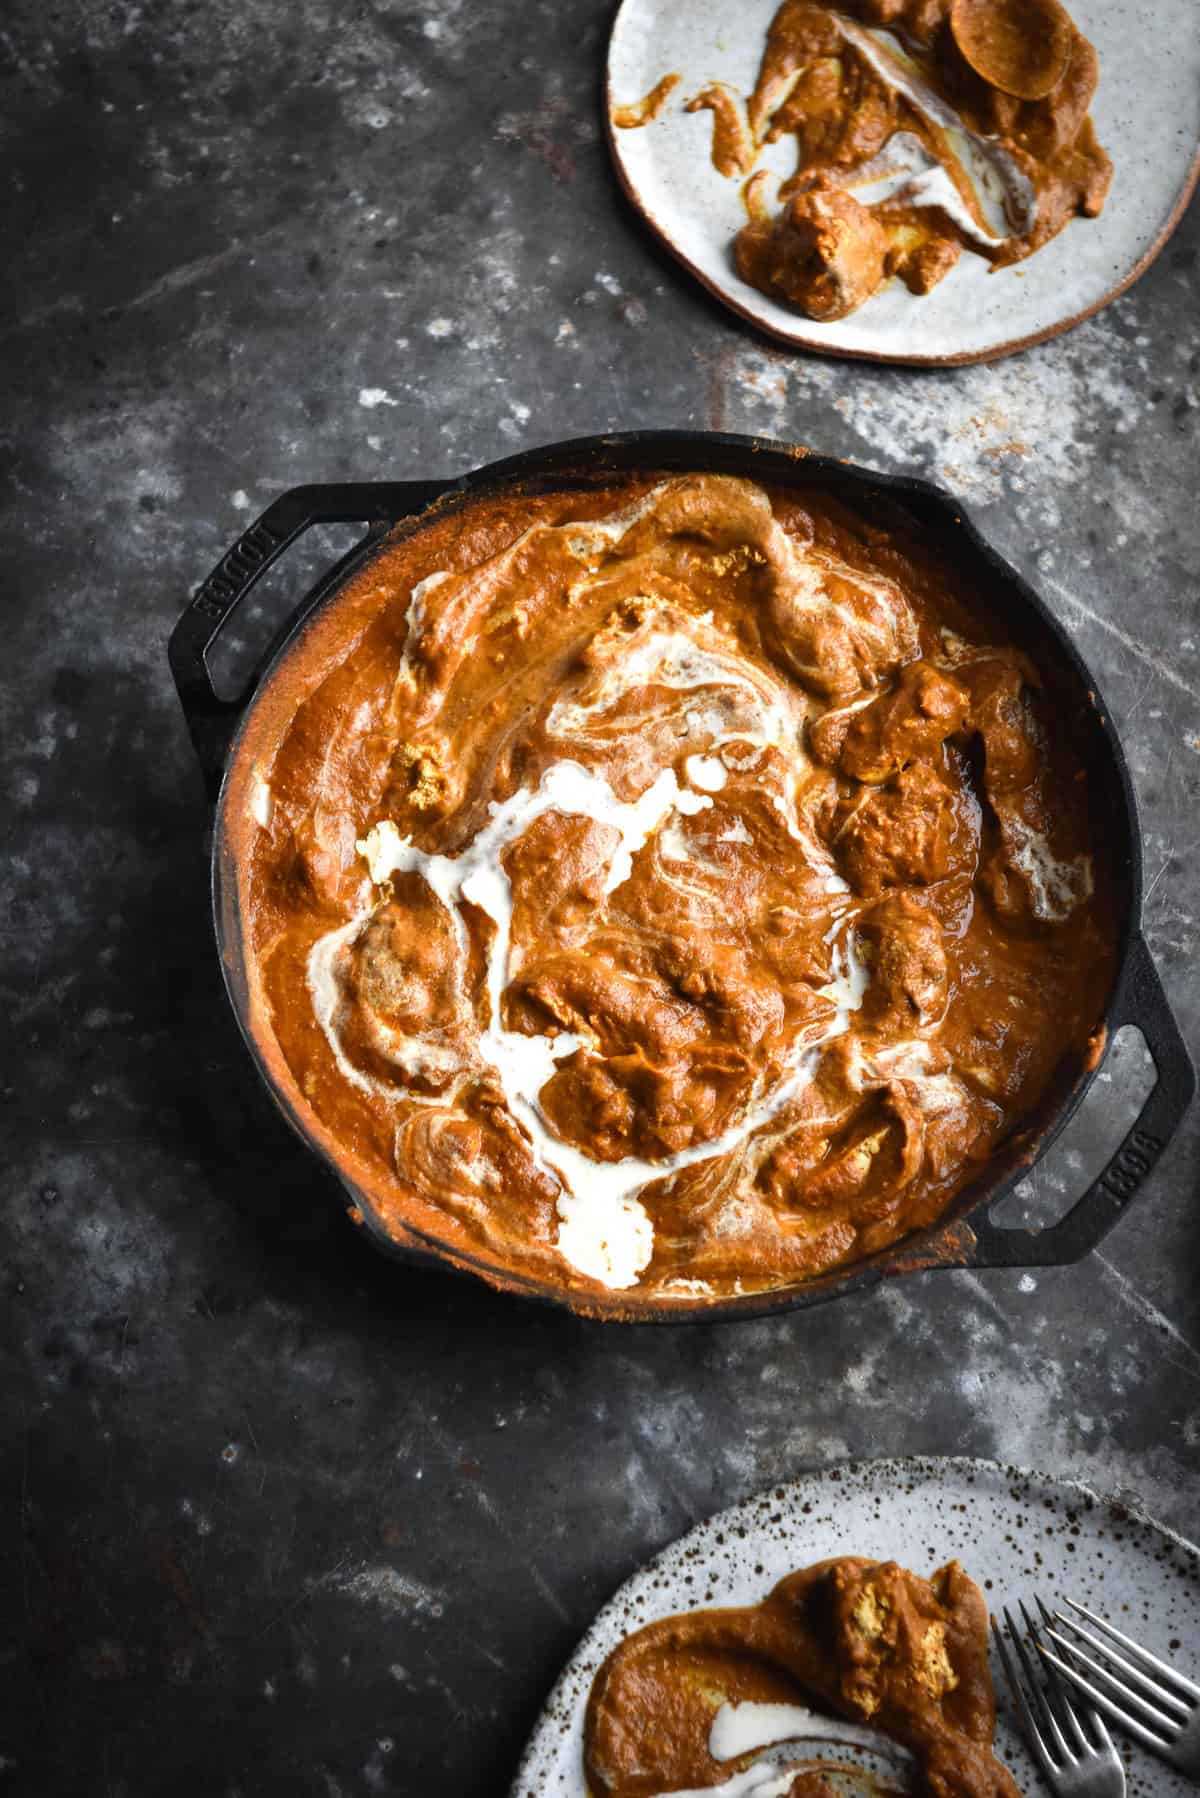 An aerial image of a skillet filled with FODMAP friendly paneer curry. The curry is a deep orange and is swirled with cream. It sits atop a medium blue steel mottled backdrop, surrounded by water glasses and extra plates